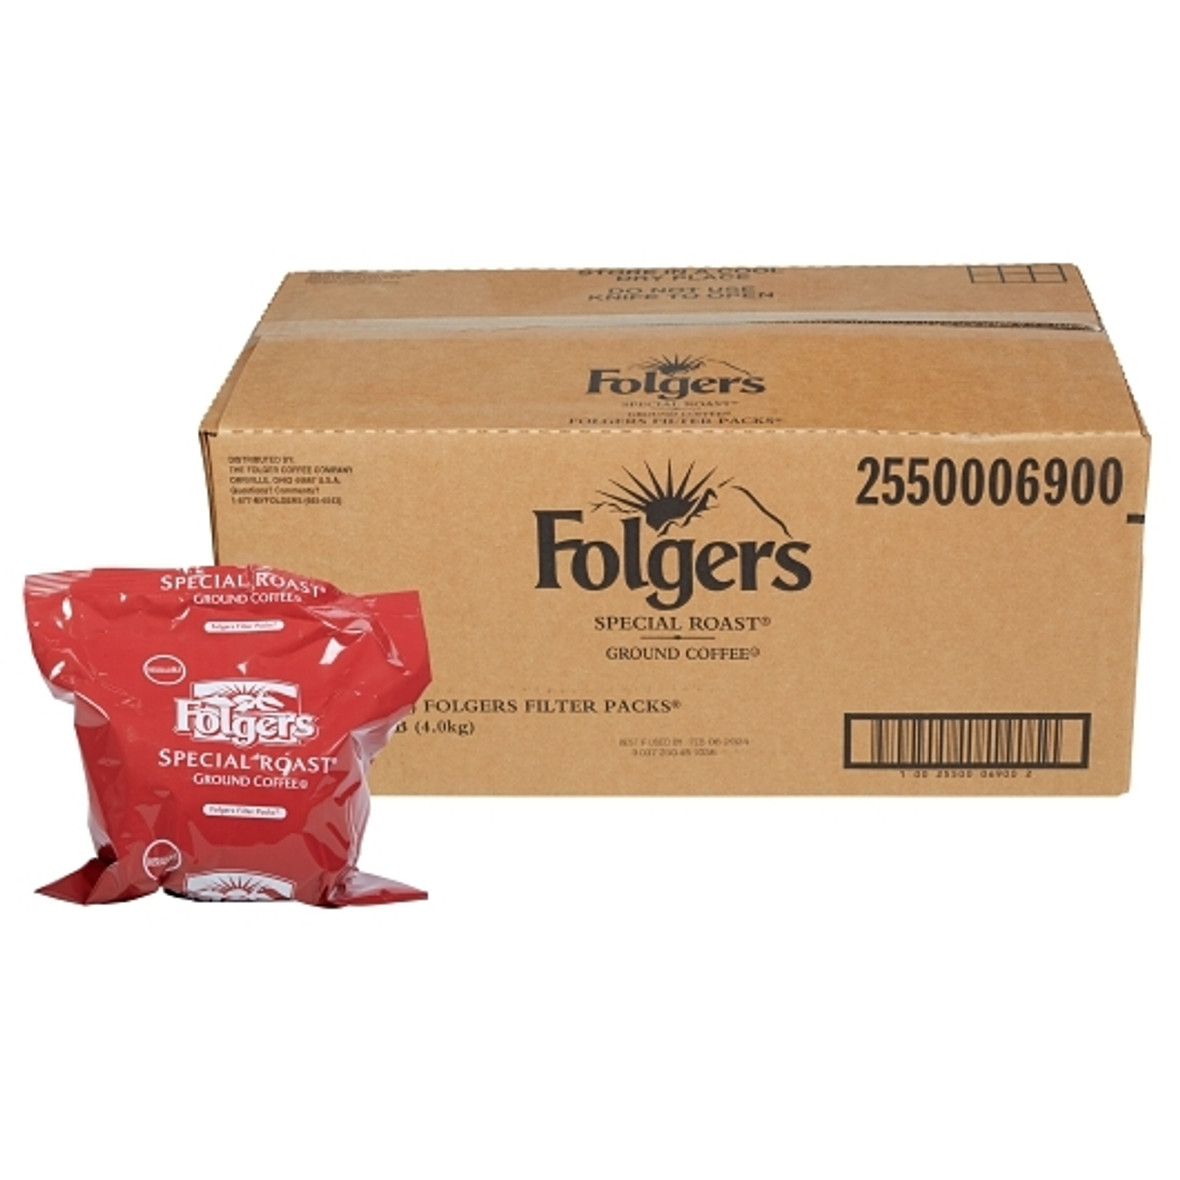 Folgers Regular Special Roast Coffee Filter Pack, 0.9 Ounce, 160 Per Case